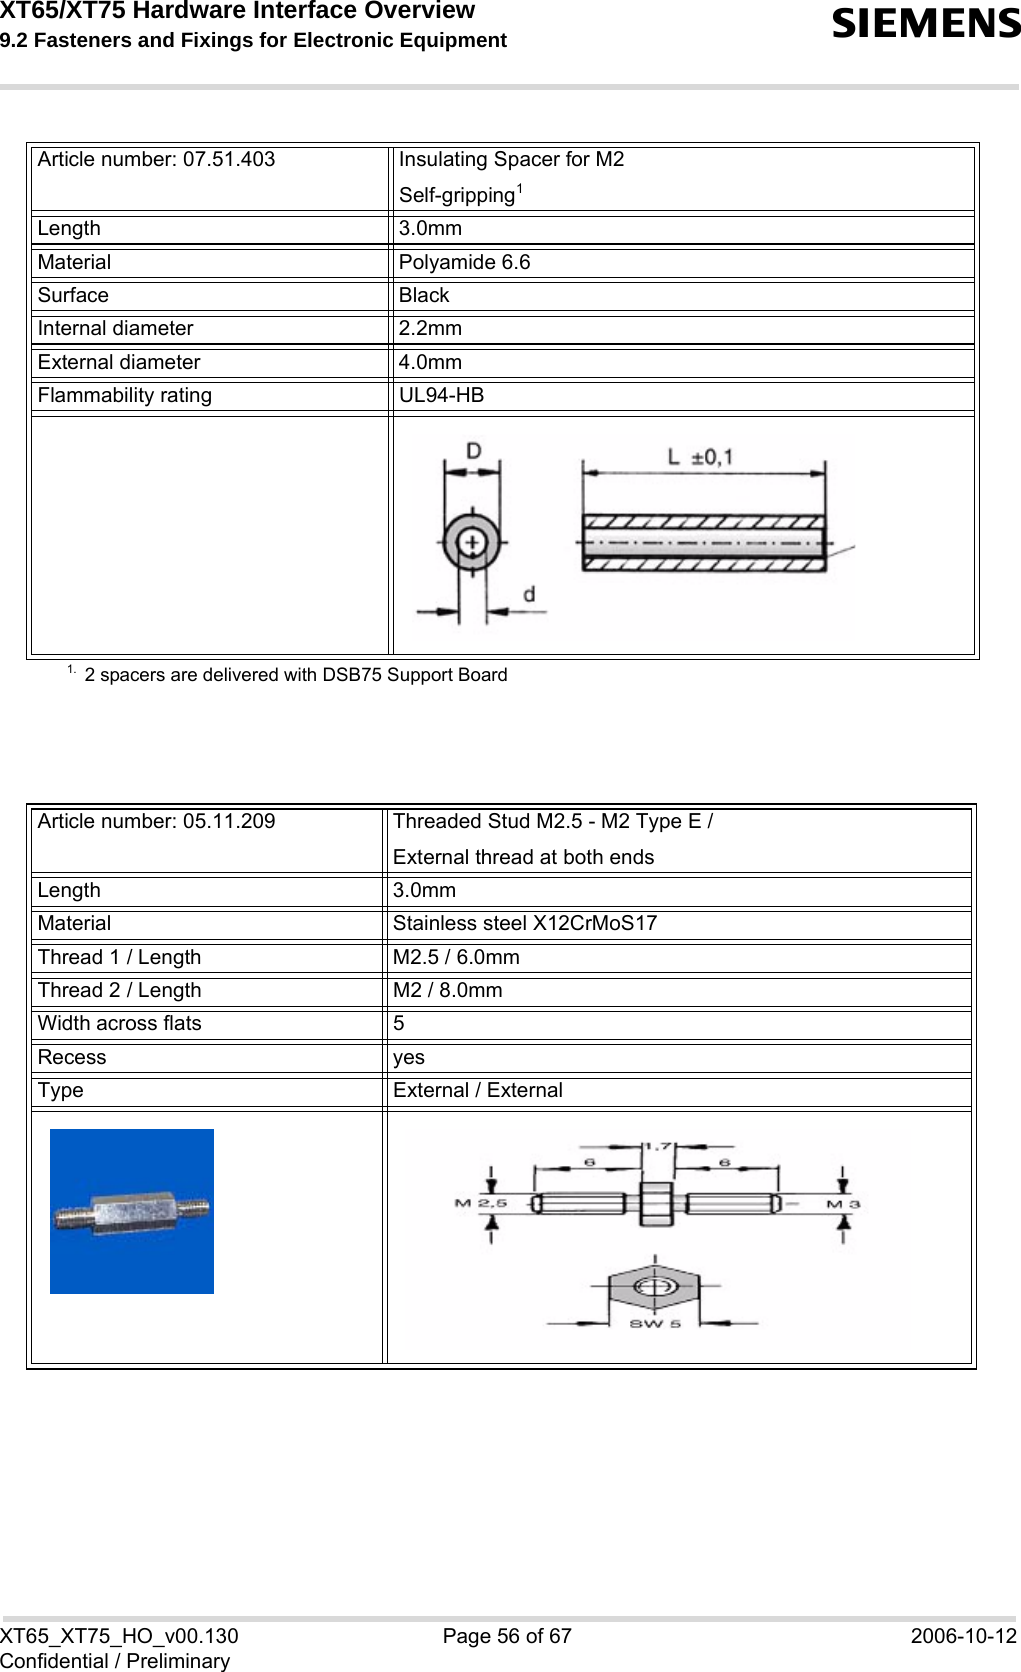 XT65/XT75 Hardware Interface Overview 9.2 Fasteners and Fixings for Electronic Equipment sXT65_XT75_HO_v00.130 Page 56 of 67 2006-10-12Confidential / PreliminaryArticle number: 07.51.403 Insulating Spacer for M2Self-gripping1Length 3.0mmMaterial Polyamide 6.6Surface BlackInternal diameter 2.2mmExternal diameter 4.0mmFlammability rating UL94-HB1. 2 spacers are delivered with DSB75 Support BoardArticle number: 05.11.209 Threaded Stud M2.5 - M2 Type E /External thread at both endsLength 3.0mmMaterial Stainless steel X12CrMoS17Thread 1 / Length M2.5 / 6.0mmThread 2 / Length M2 / 8.0mmWidth across flats 5 Recess yesType External / External